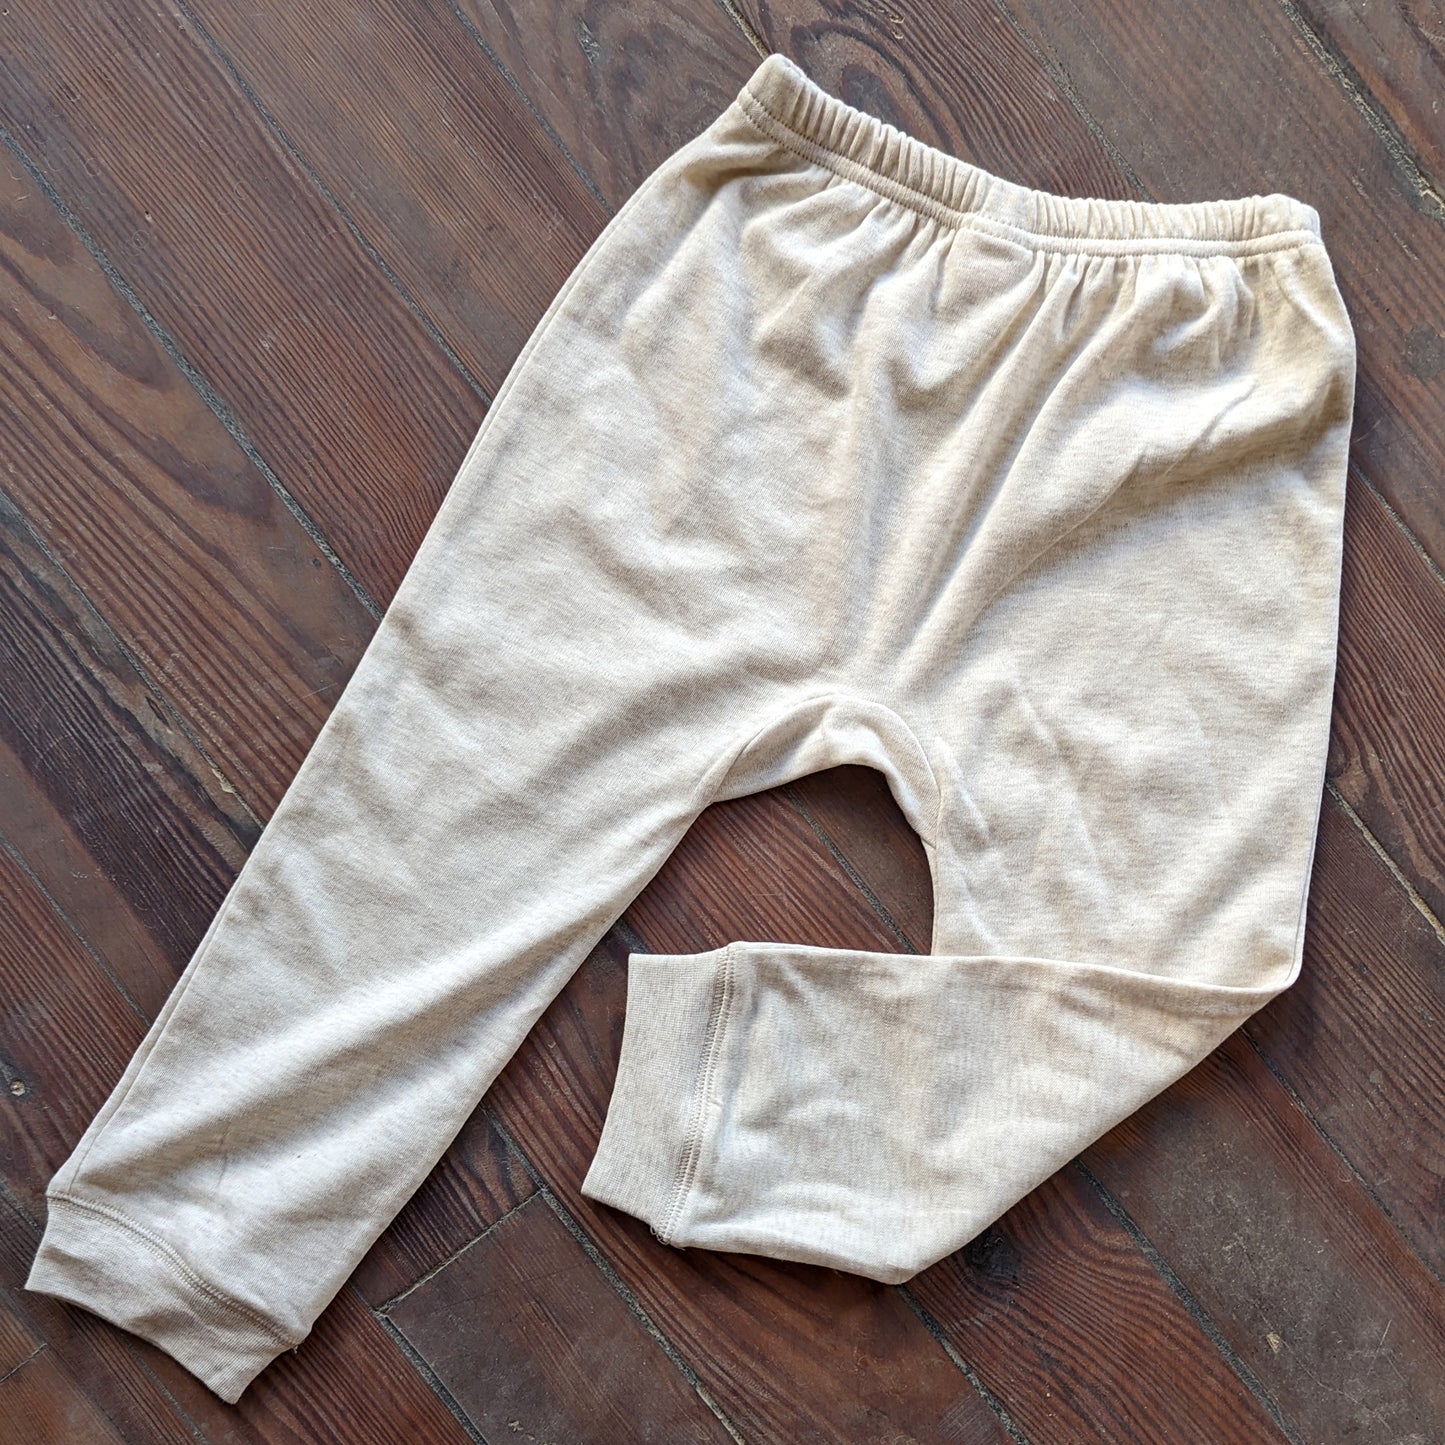 Beige Joggers (2T-5T) - Cozy, Soft, Perfect for Sleep or Play - Add-On Item